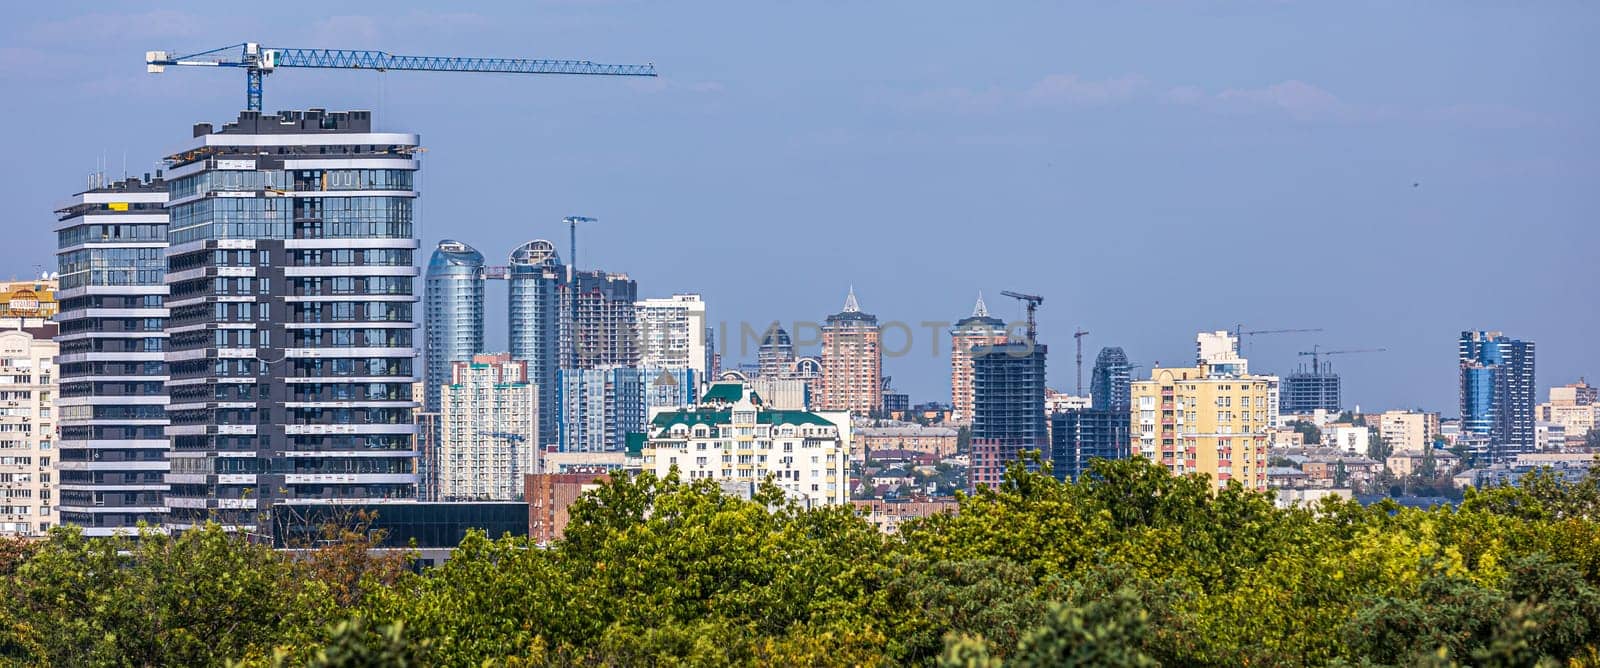 Aerial photography of residential areas of Kyiv with a view of the railway station and new skyscrapers under construction, aerial view, city photography. Copy space by sarymsakov